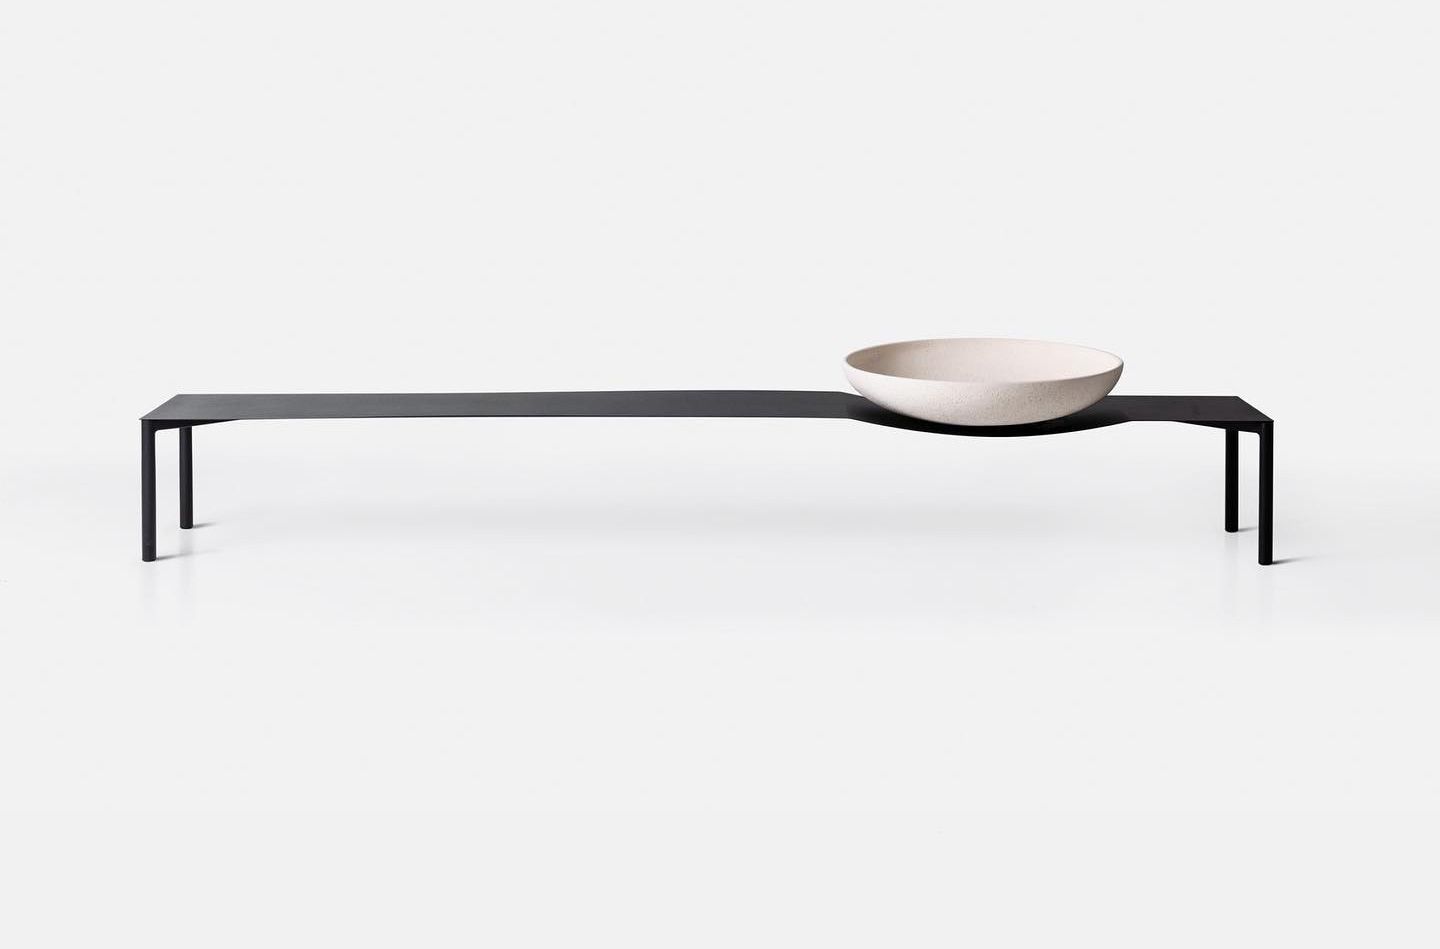 Minimalist photography of the Bowl Coffee Table